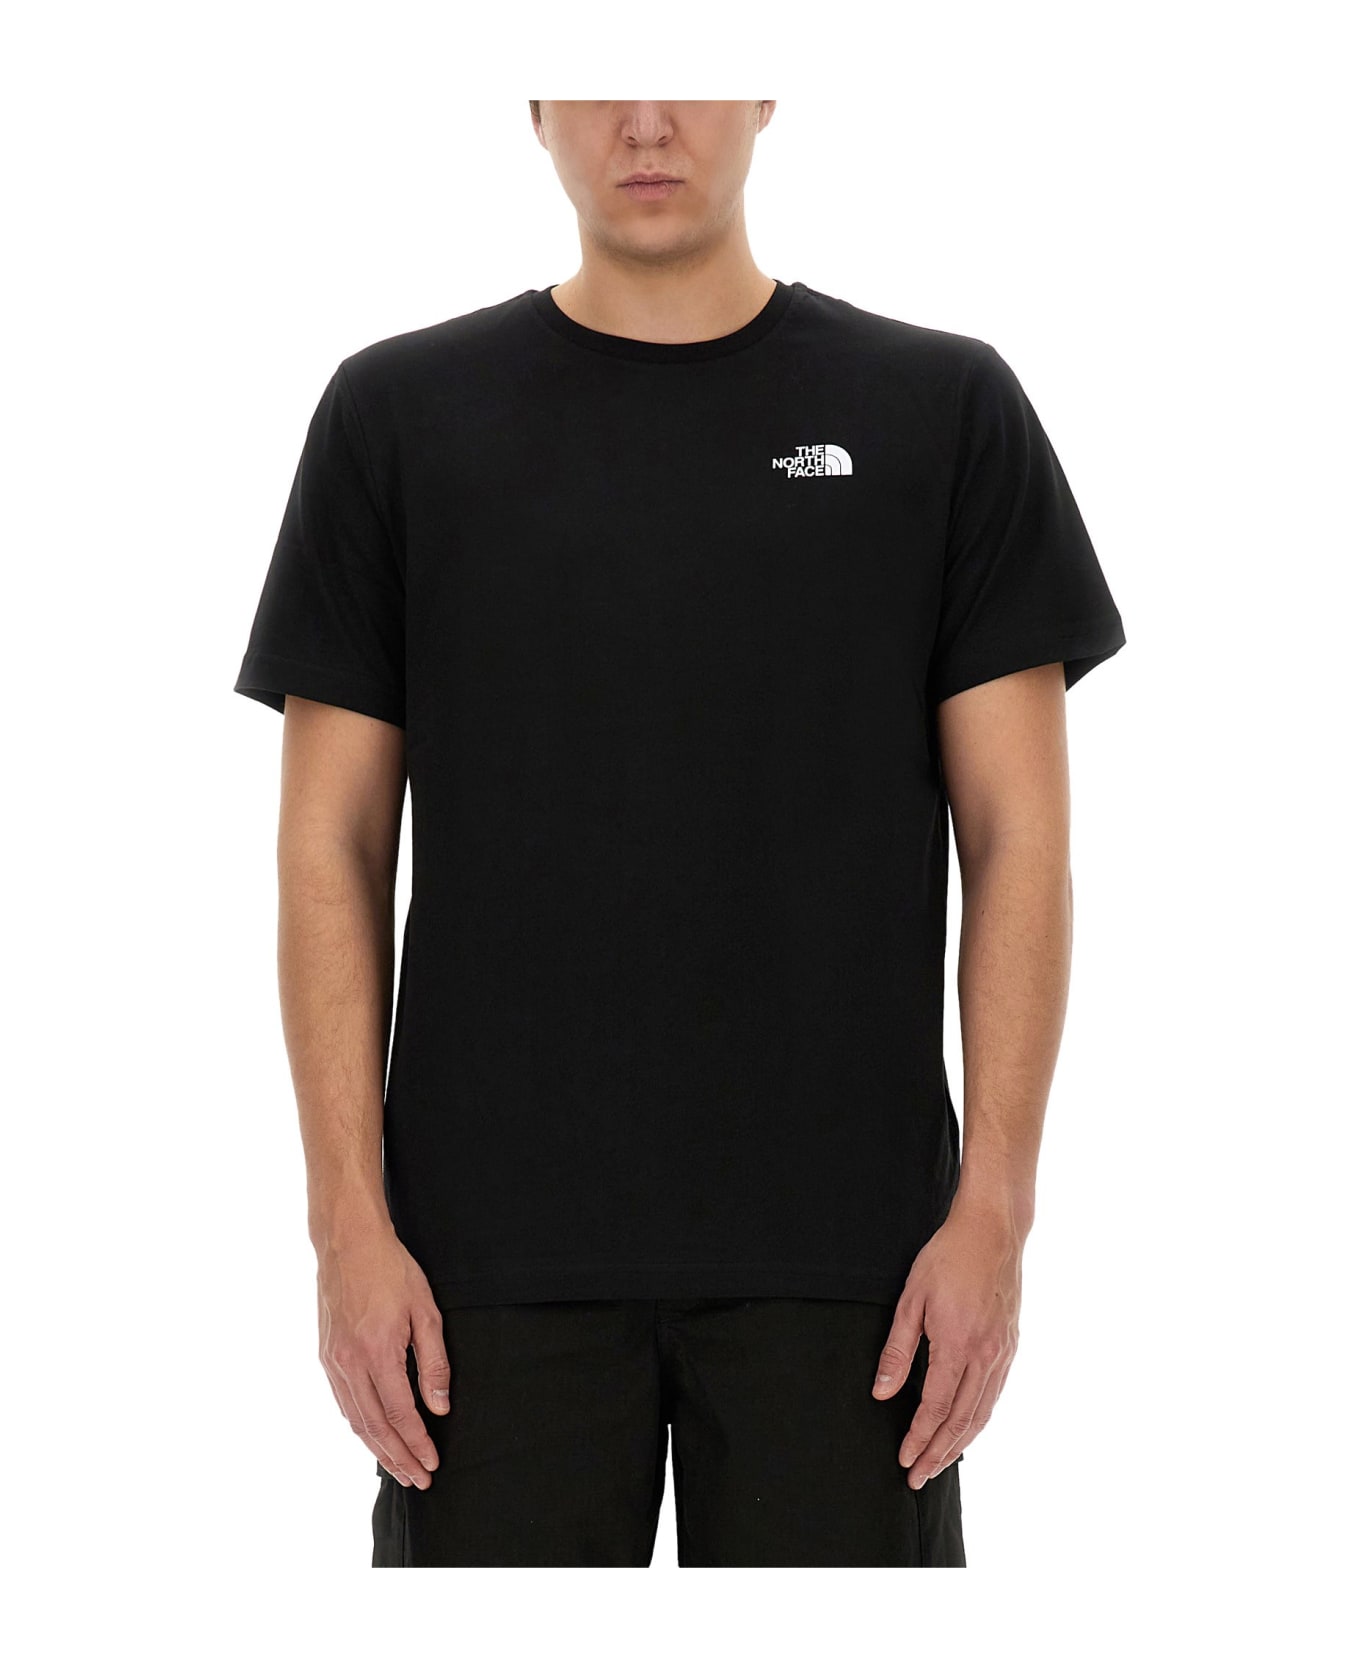 The North Face T-shirt With Logo - Black